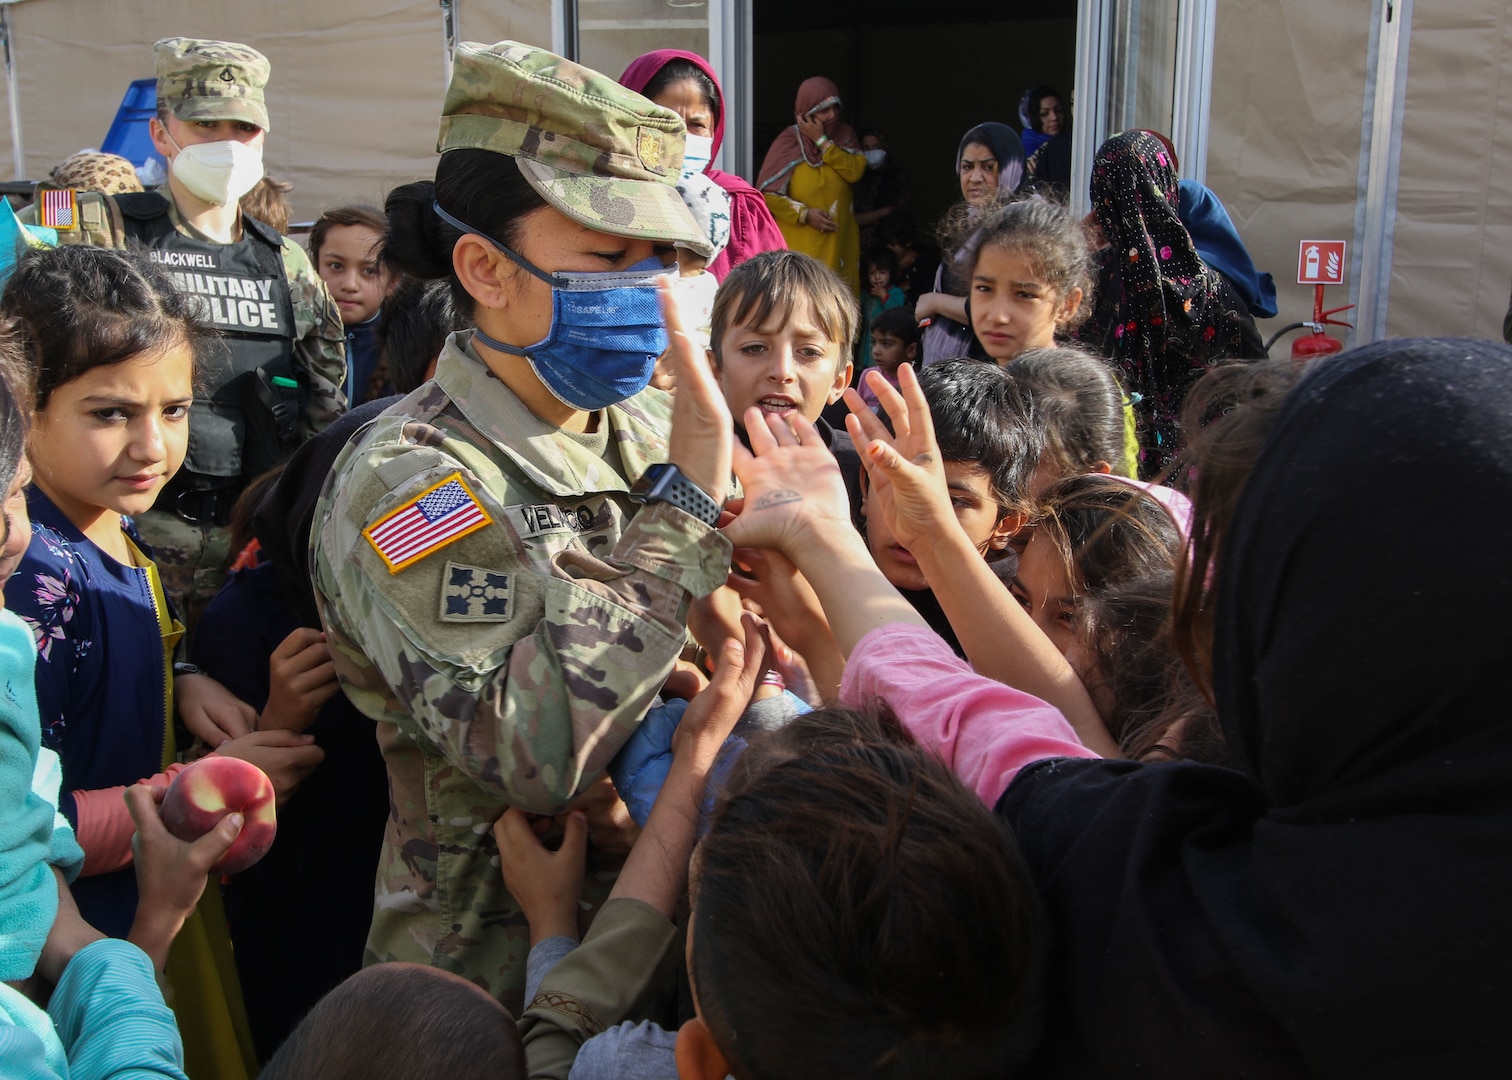 Soldiers aid LRMC efforts during OAW